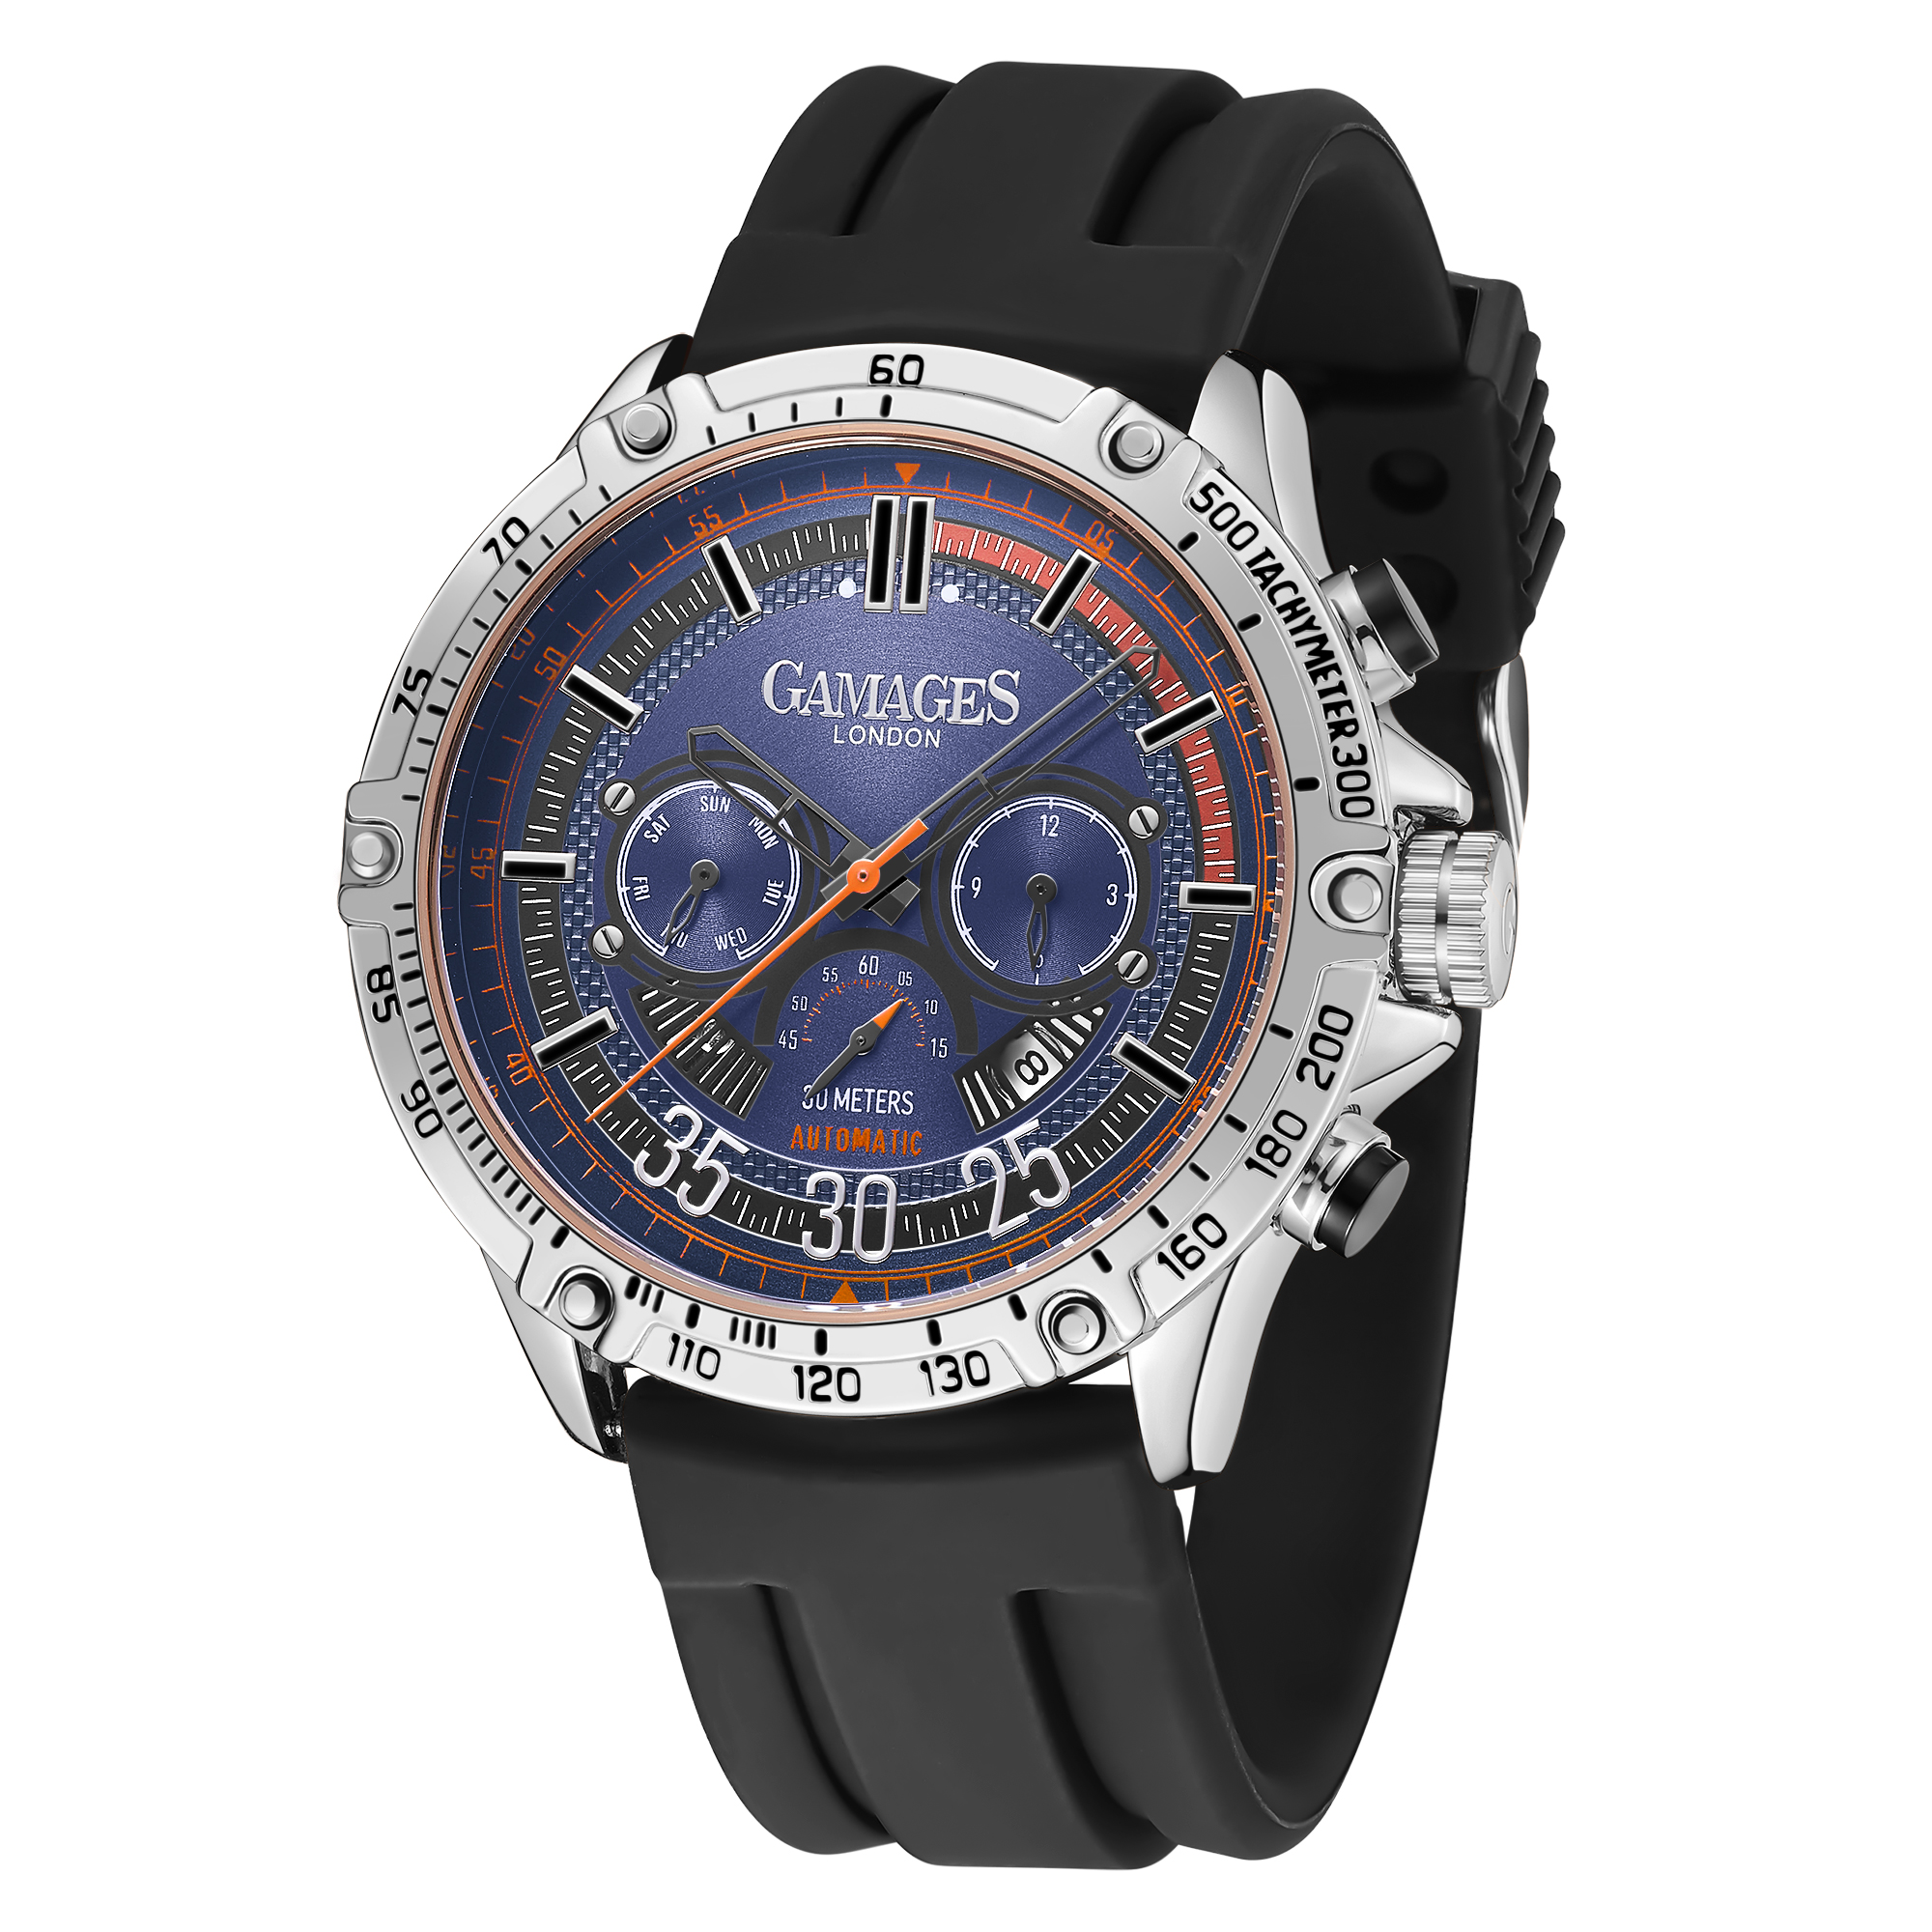 Gamages of London Hand Assembled Mechanical Racer Automatic Steel - 5 Years Warranty and Free Deliv.